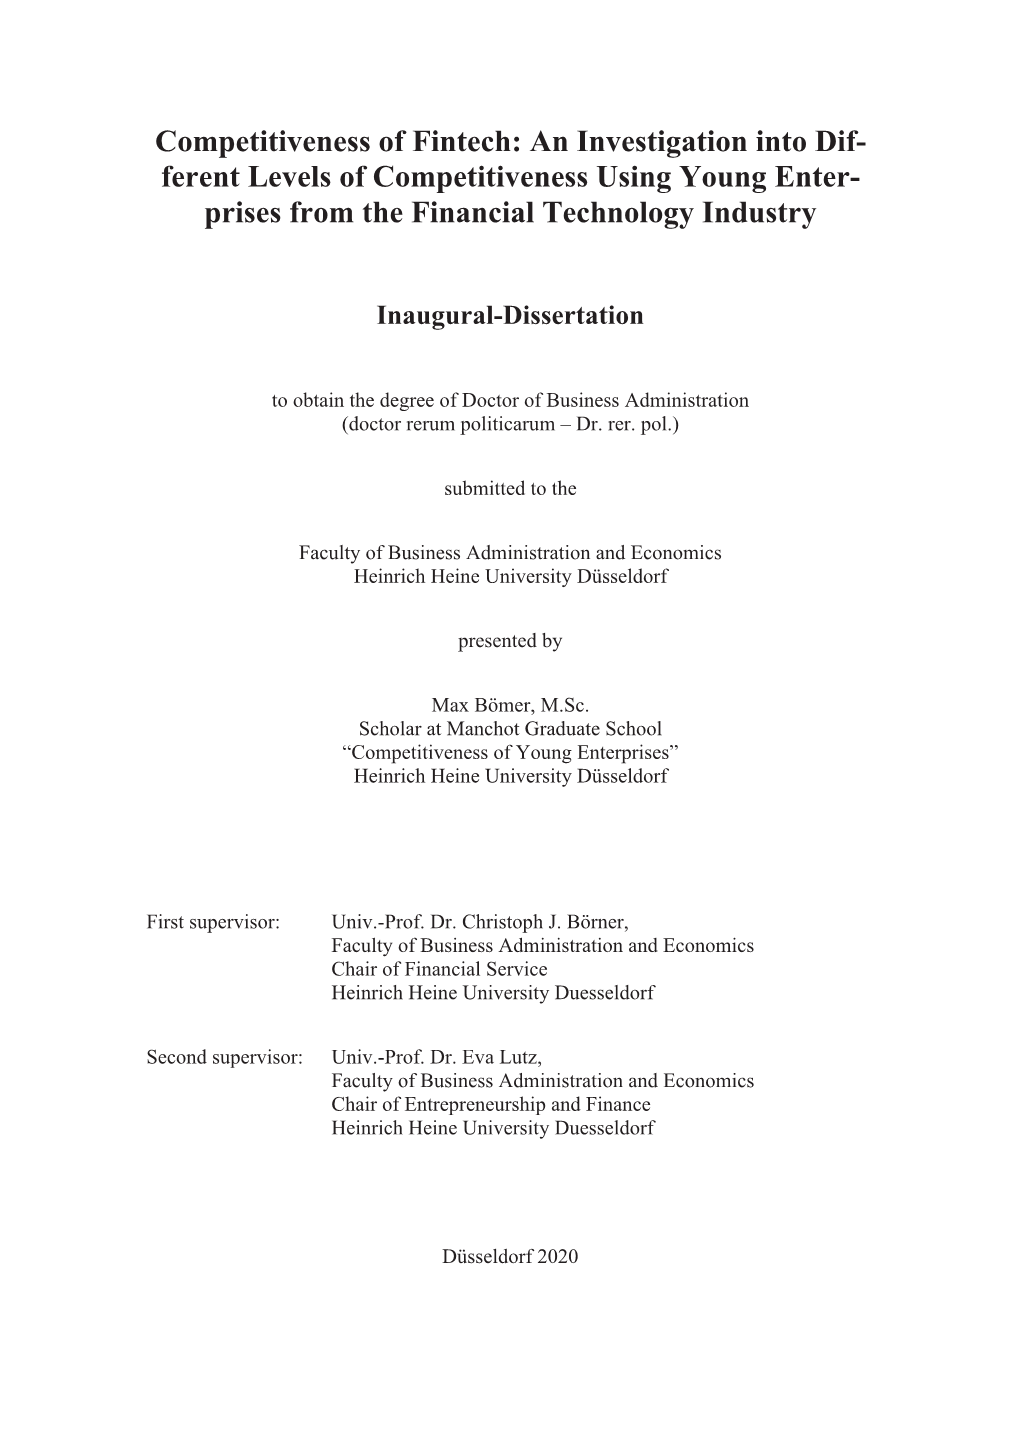 Competitiveness of Fintech: an Investigation Into Dif- Ferent Levels of Competitiveness Using Young Enter- Prises from the Financial Technology Industry